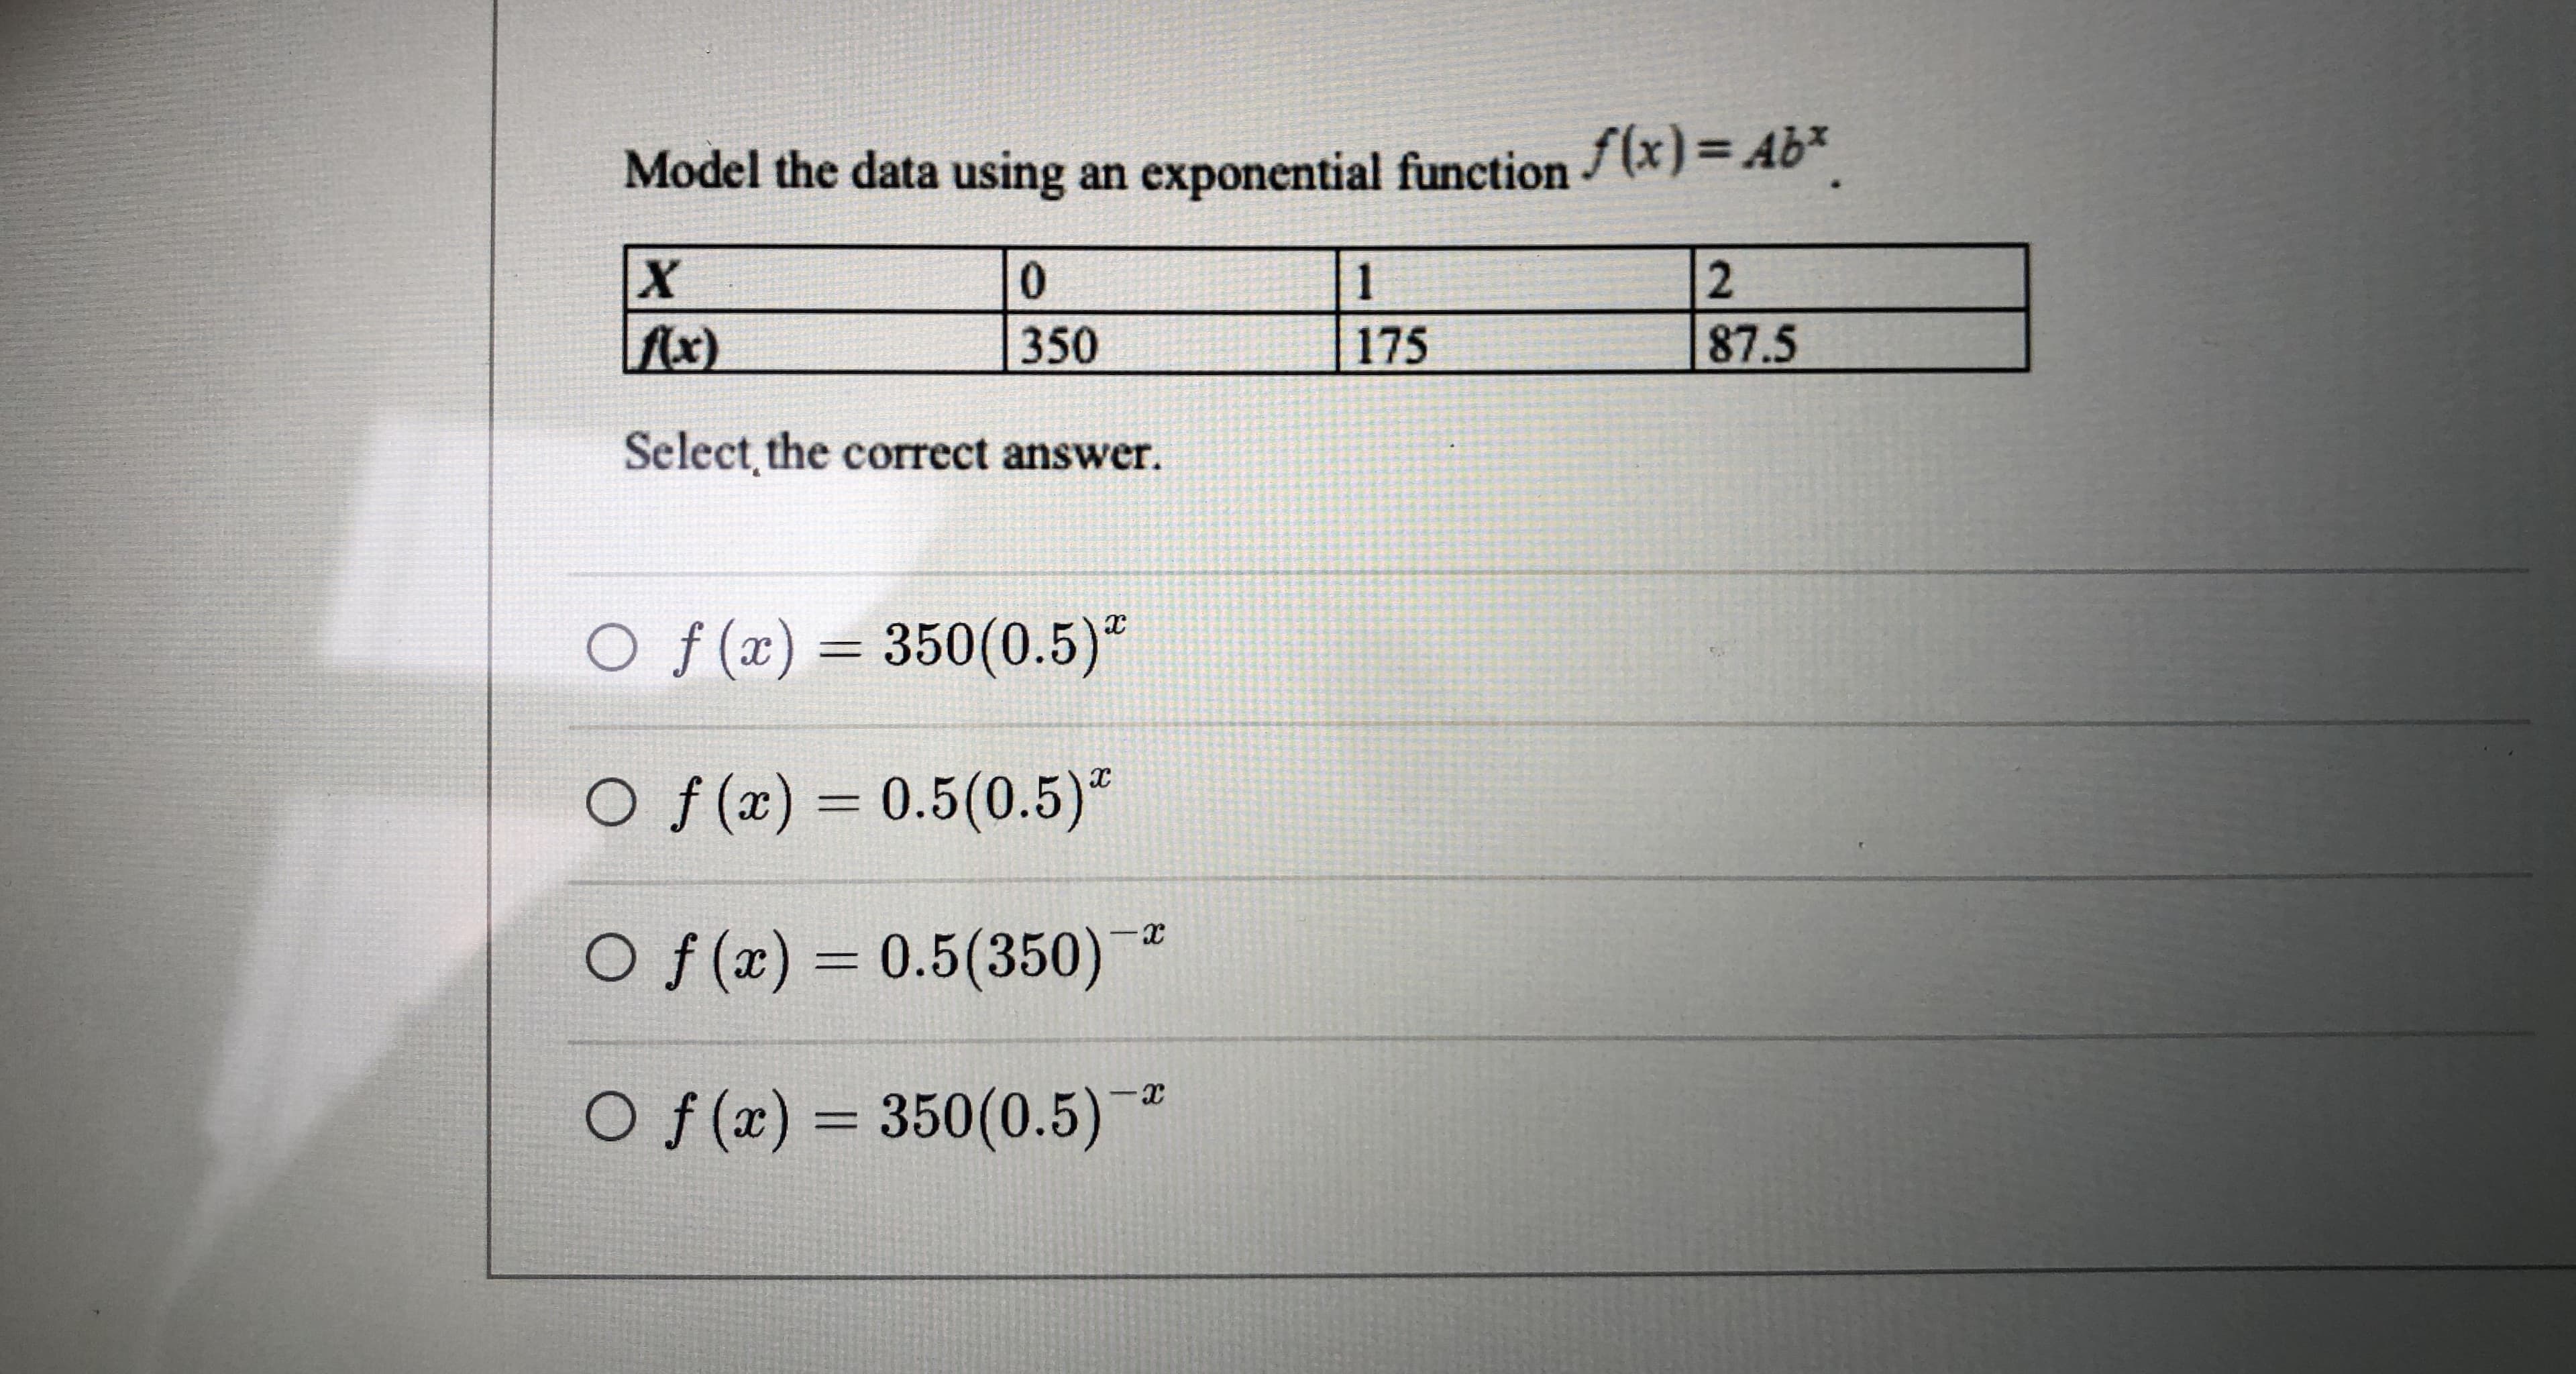 Model the data using an exponential function (x) = Ab*
175
350
87.5
Select, the correct answer.
